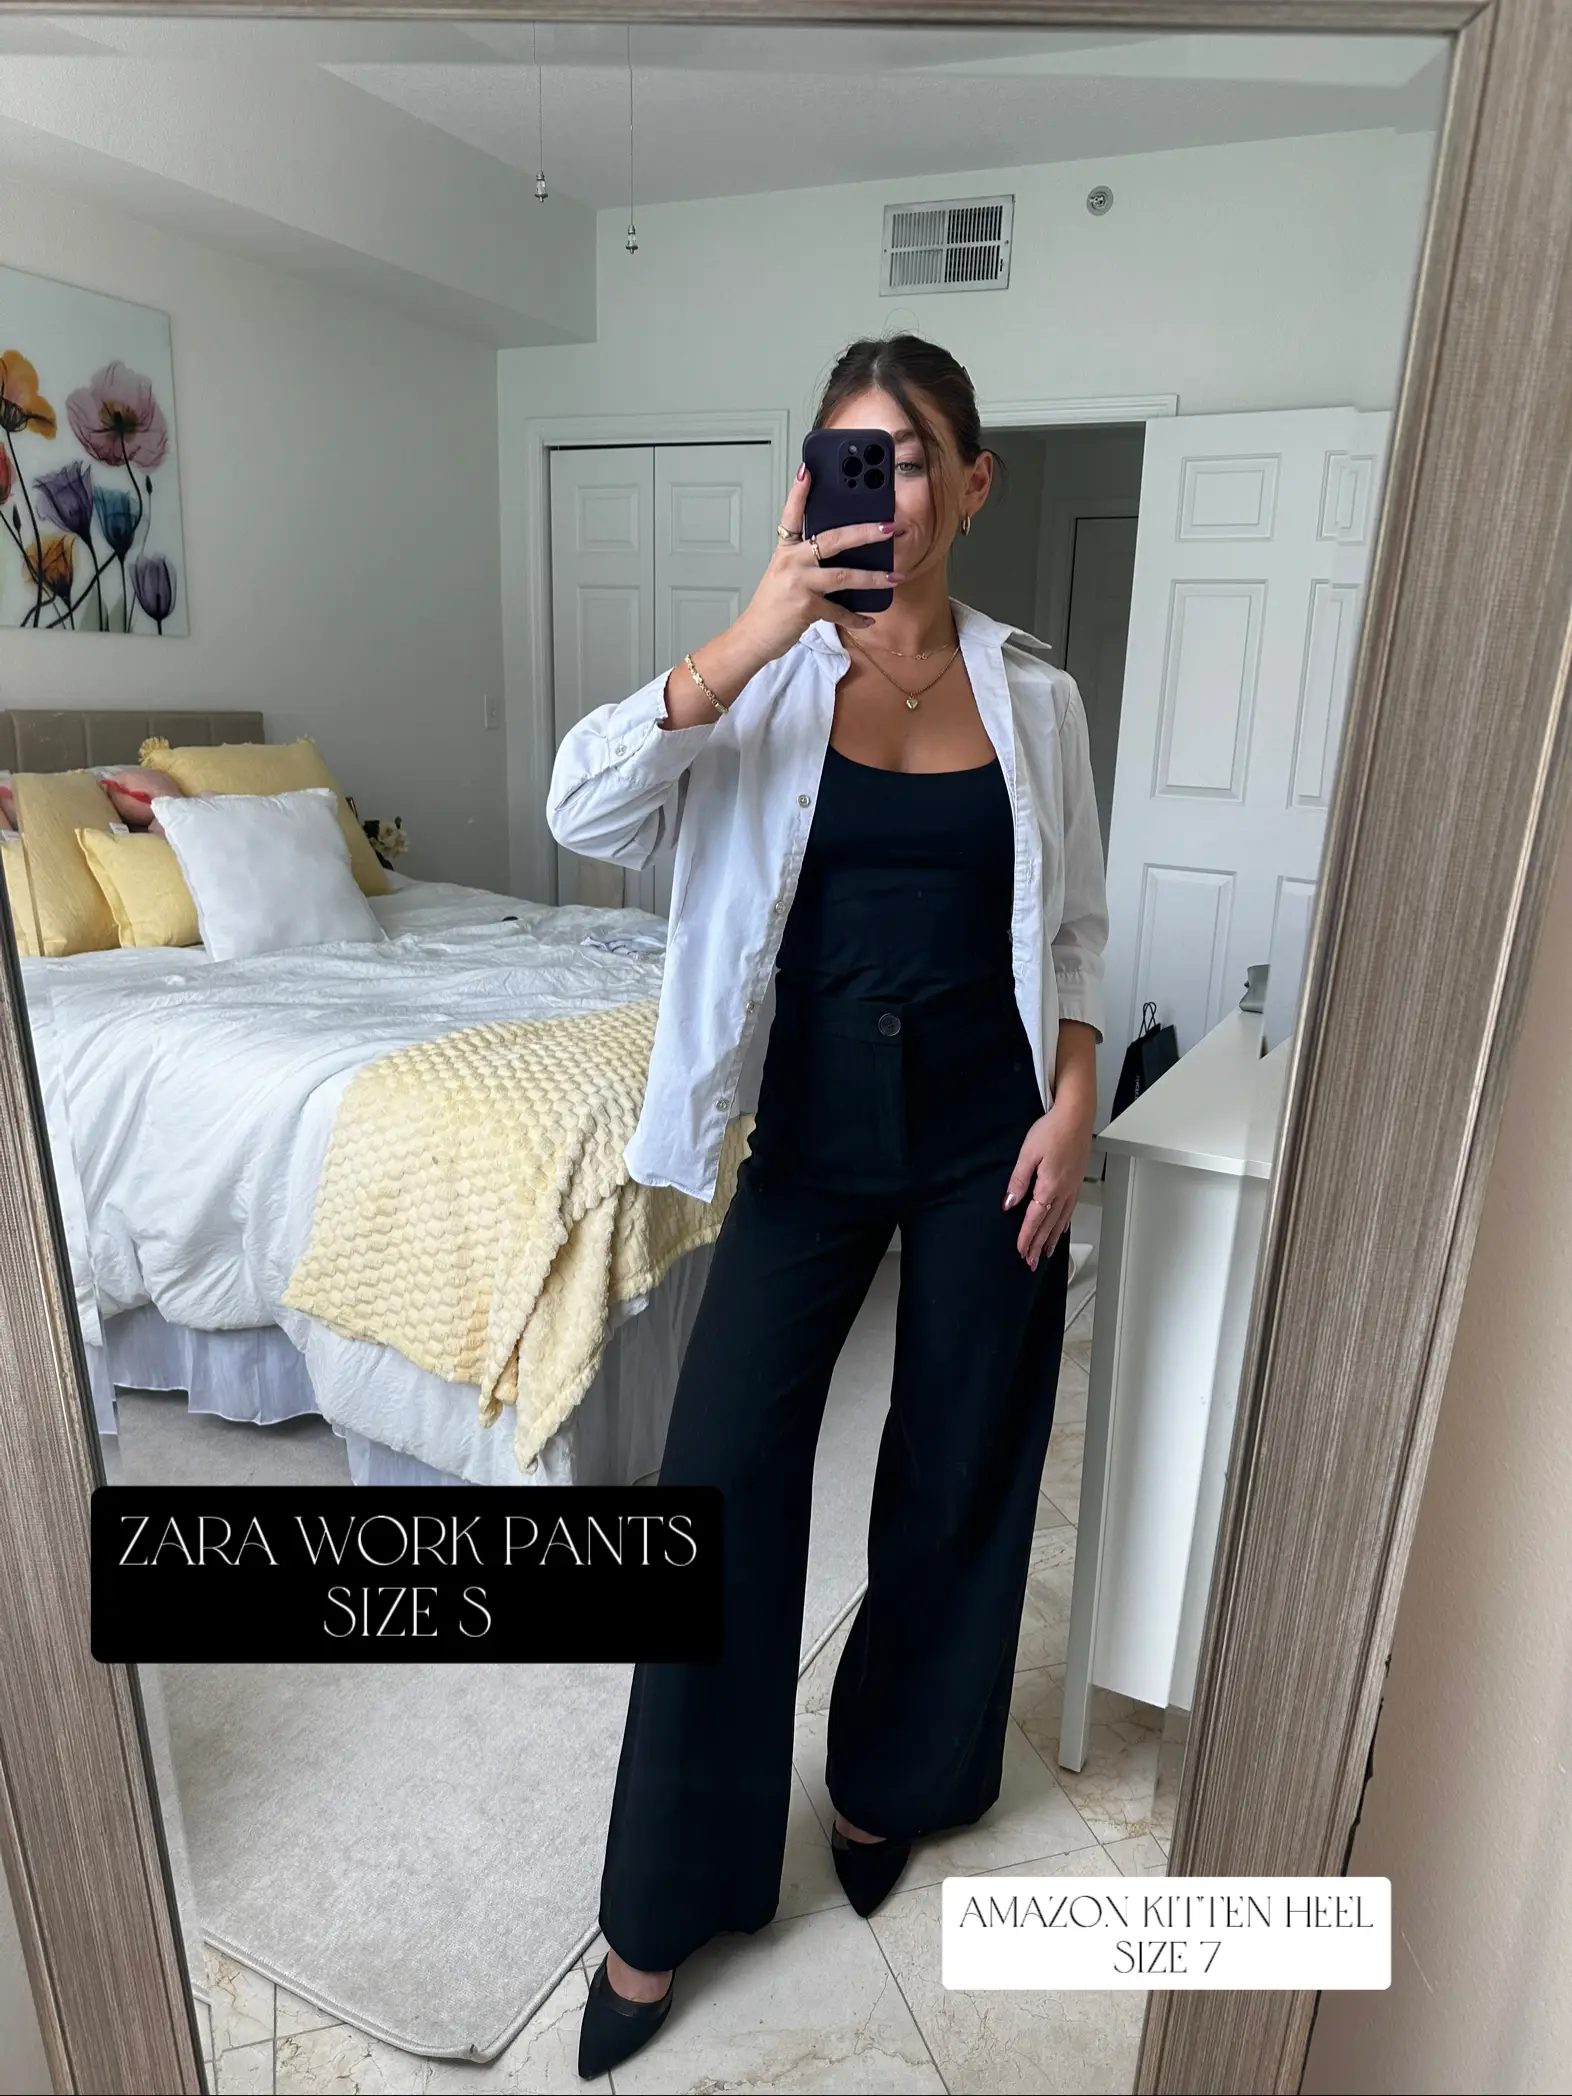 How to style Zara tanks for work!, Gallery posted by amanda pagano